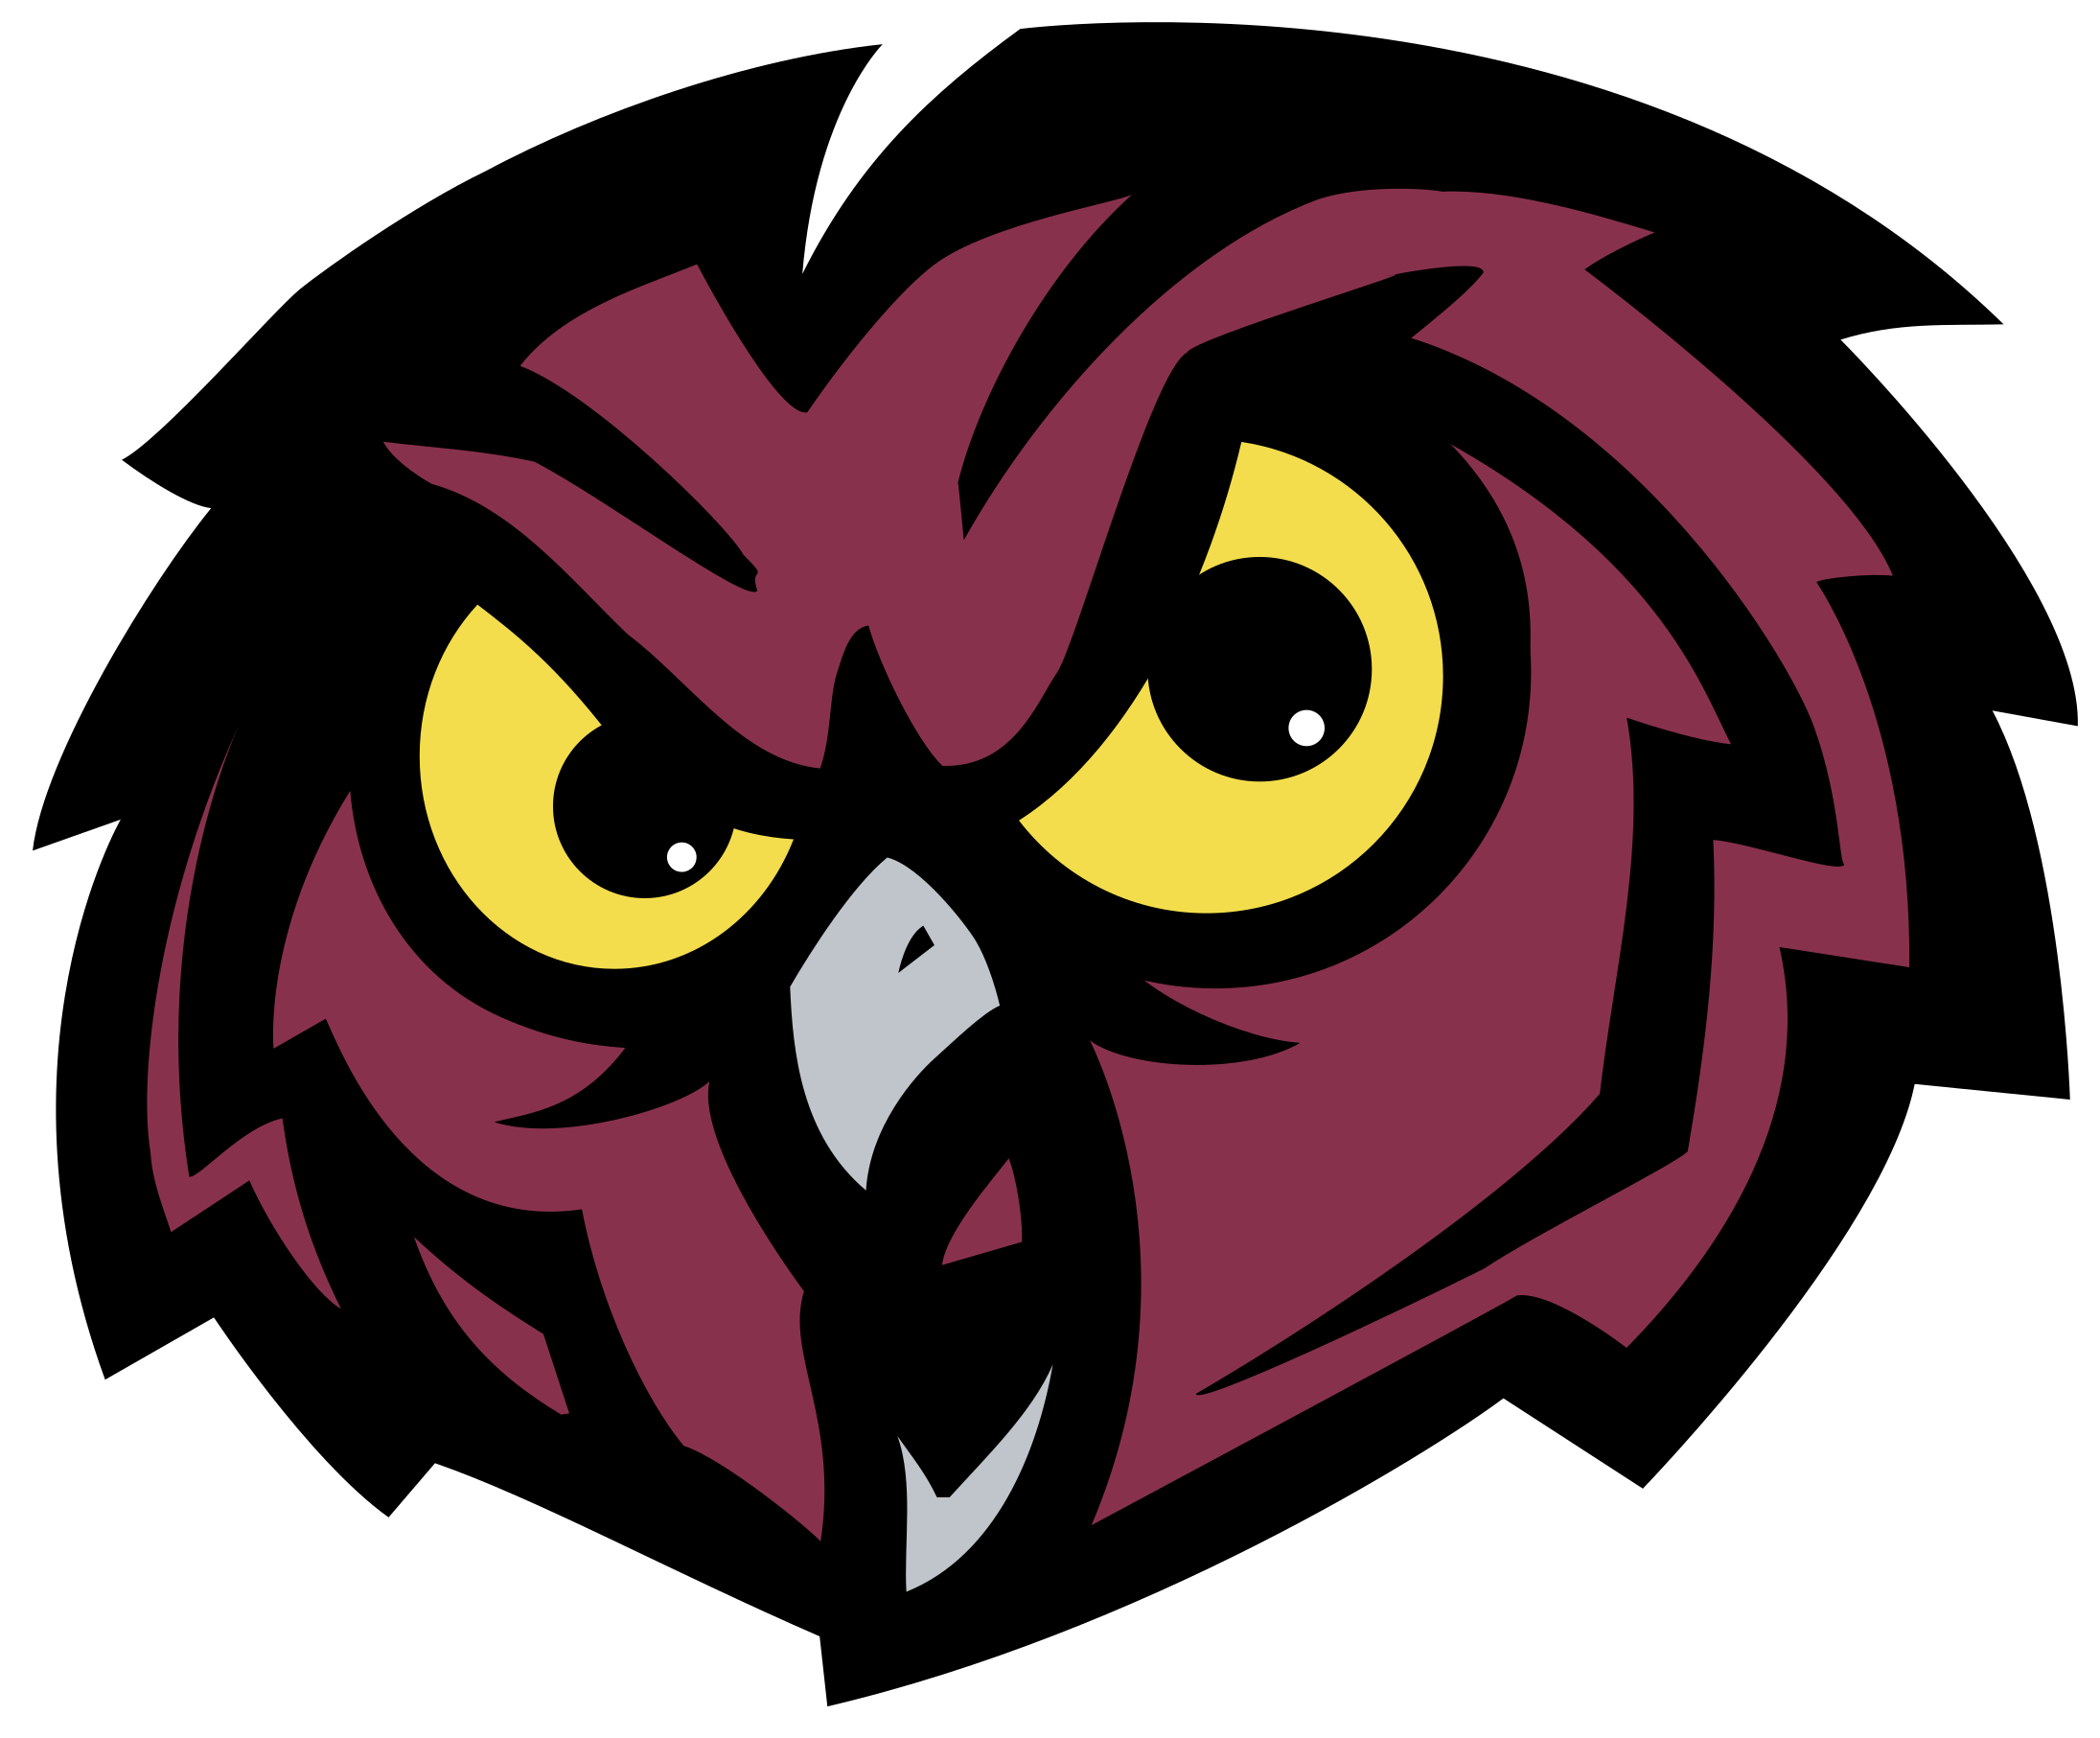 Temple Owls Logo Black And White - Temple Owls Men's Basketball (2400x2400)